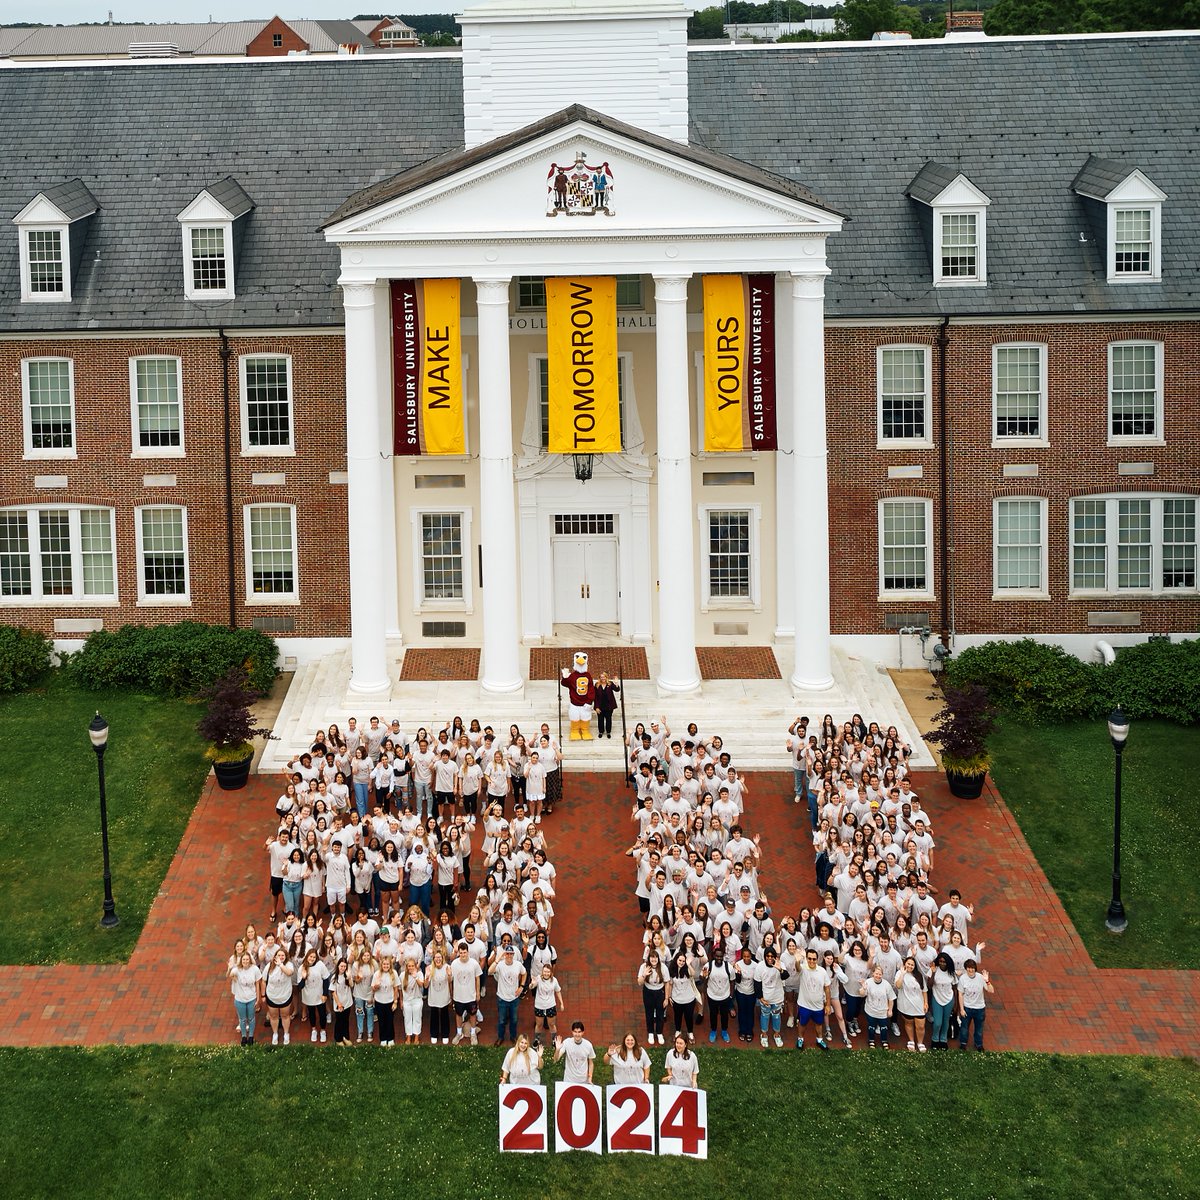 Though our time together began amidst uncertainty, our bonds have only grown stronger. Here's to capturing a moment delayed but never forgotten: Salisbury University's Class of 2024, together at last. ❤️